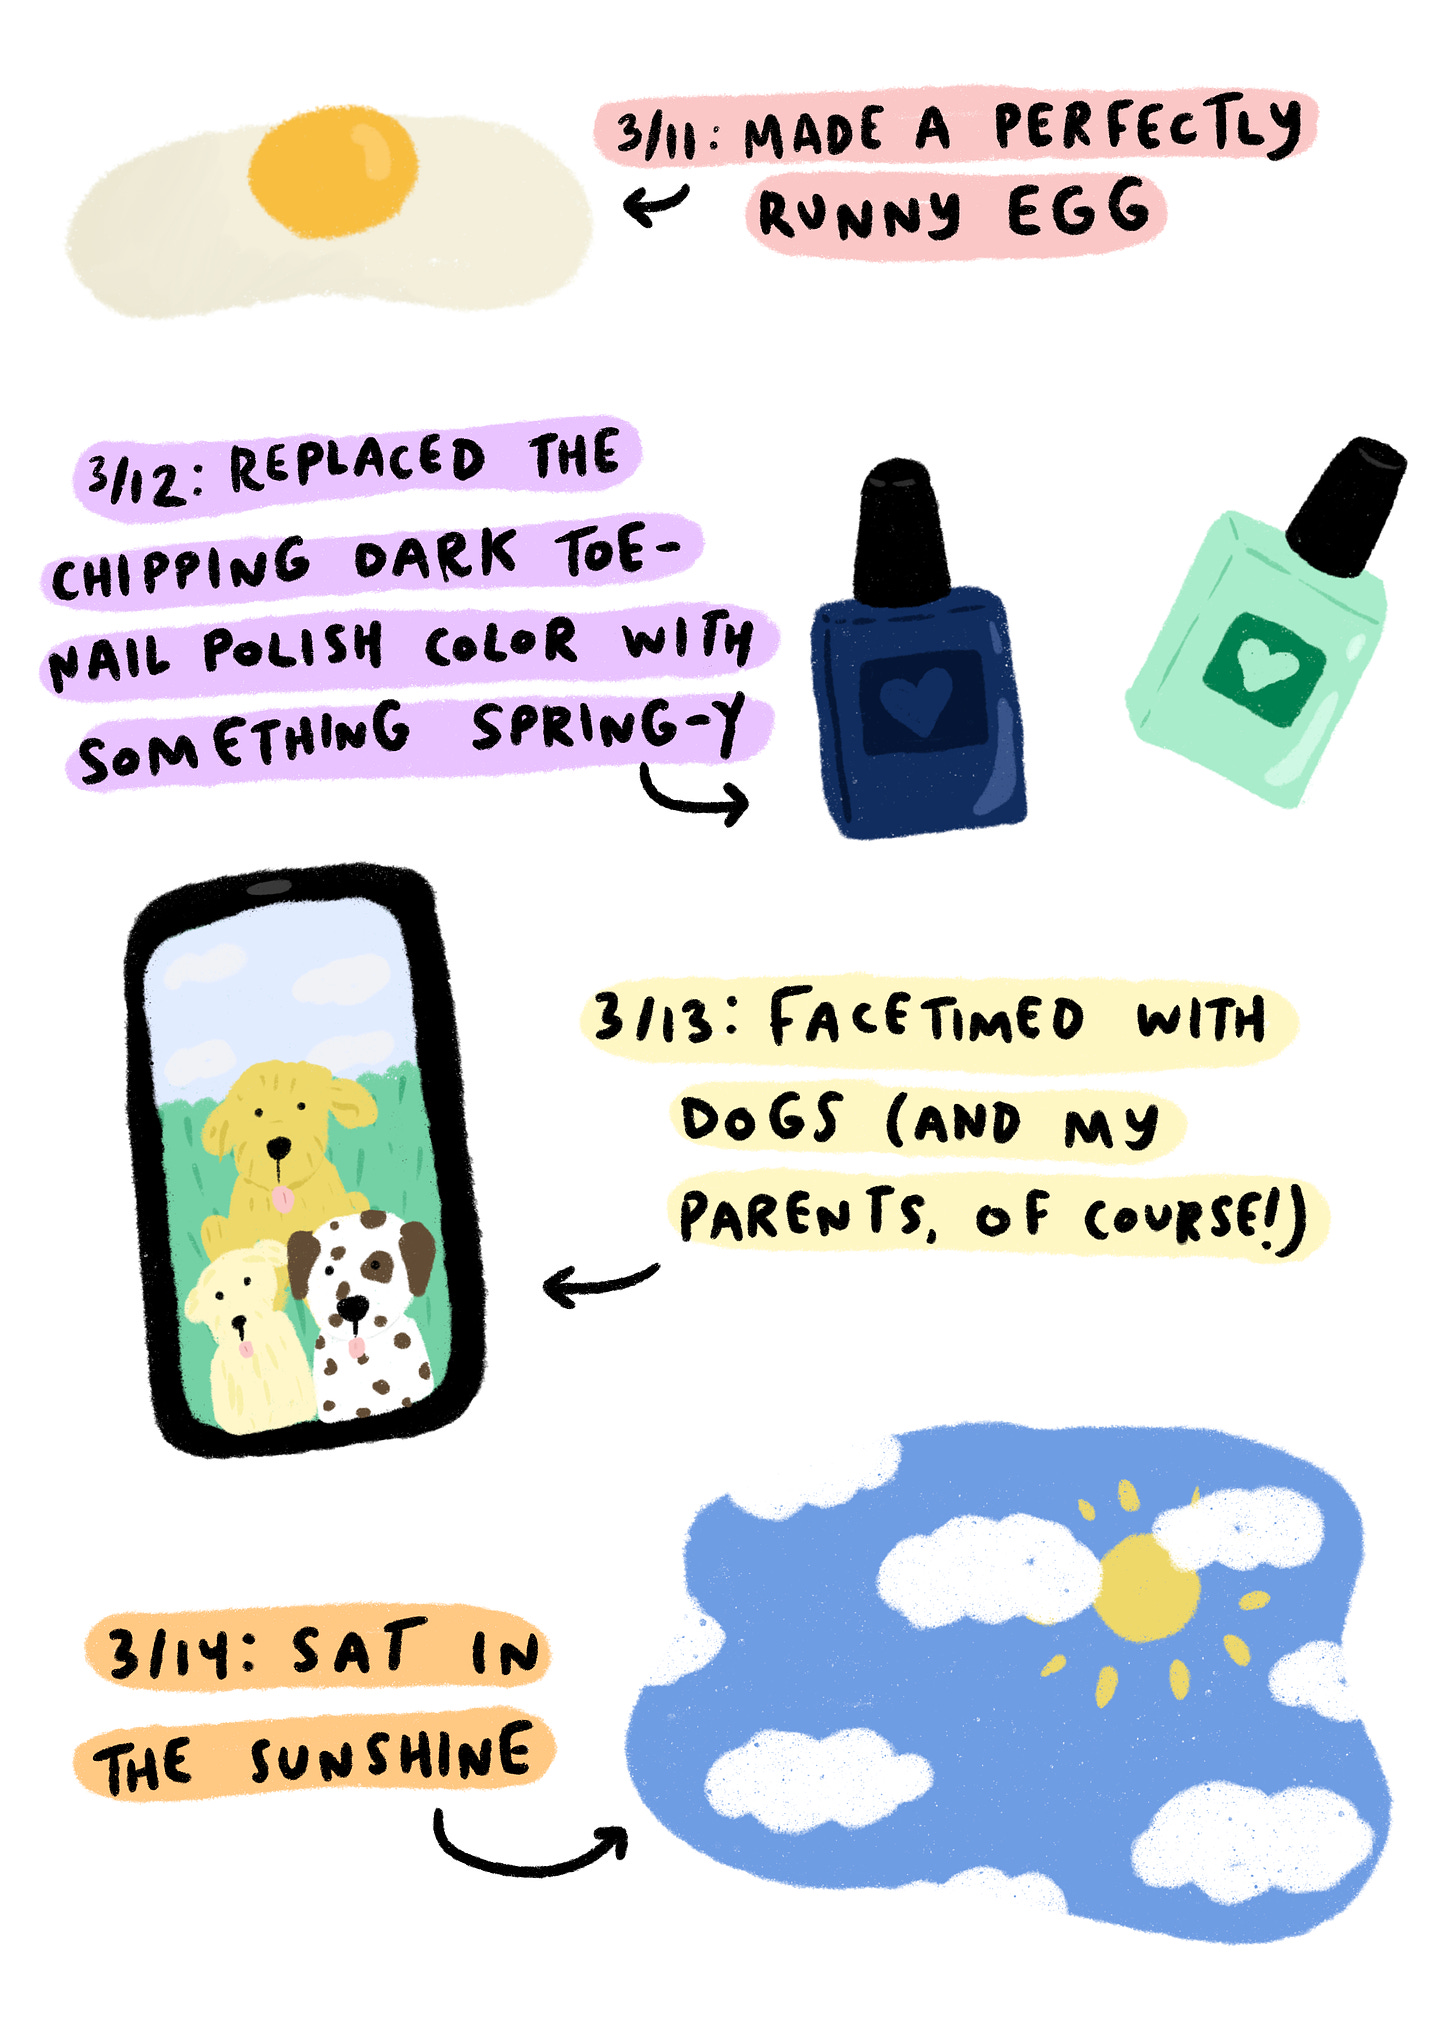 illustration of an egg, a nail polish bottle, Facetime with dogs, and a blue sky